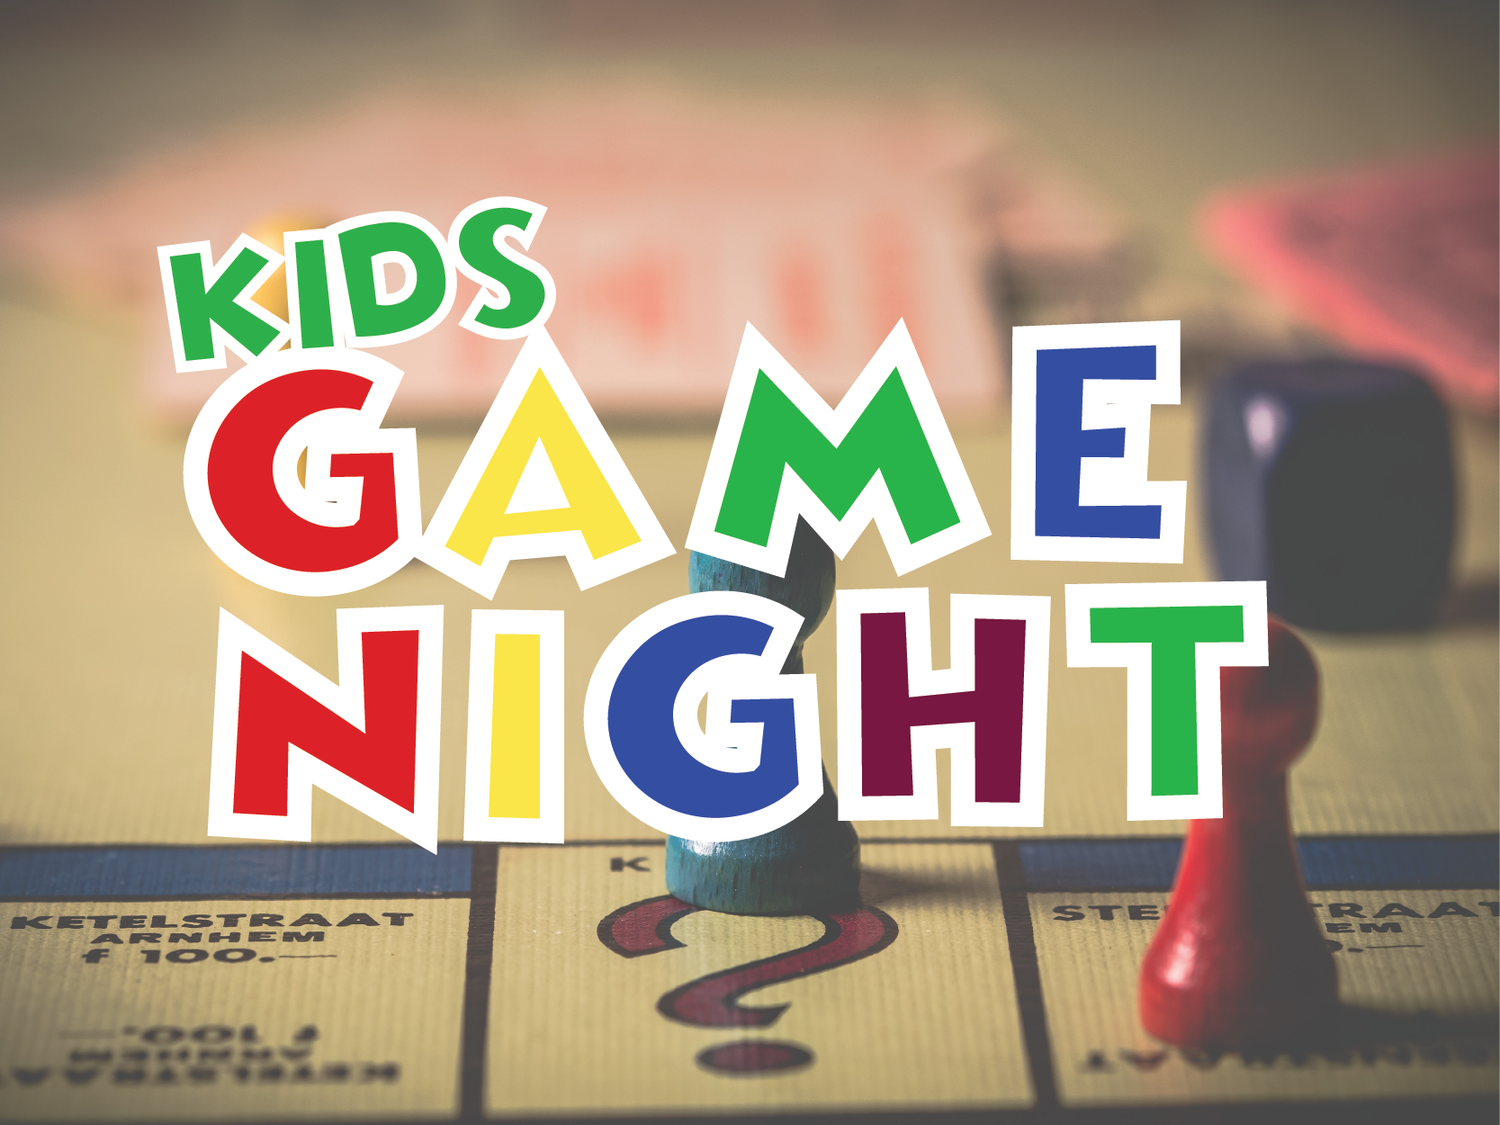 Kids Game Night graphic with image of board game in background